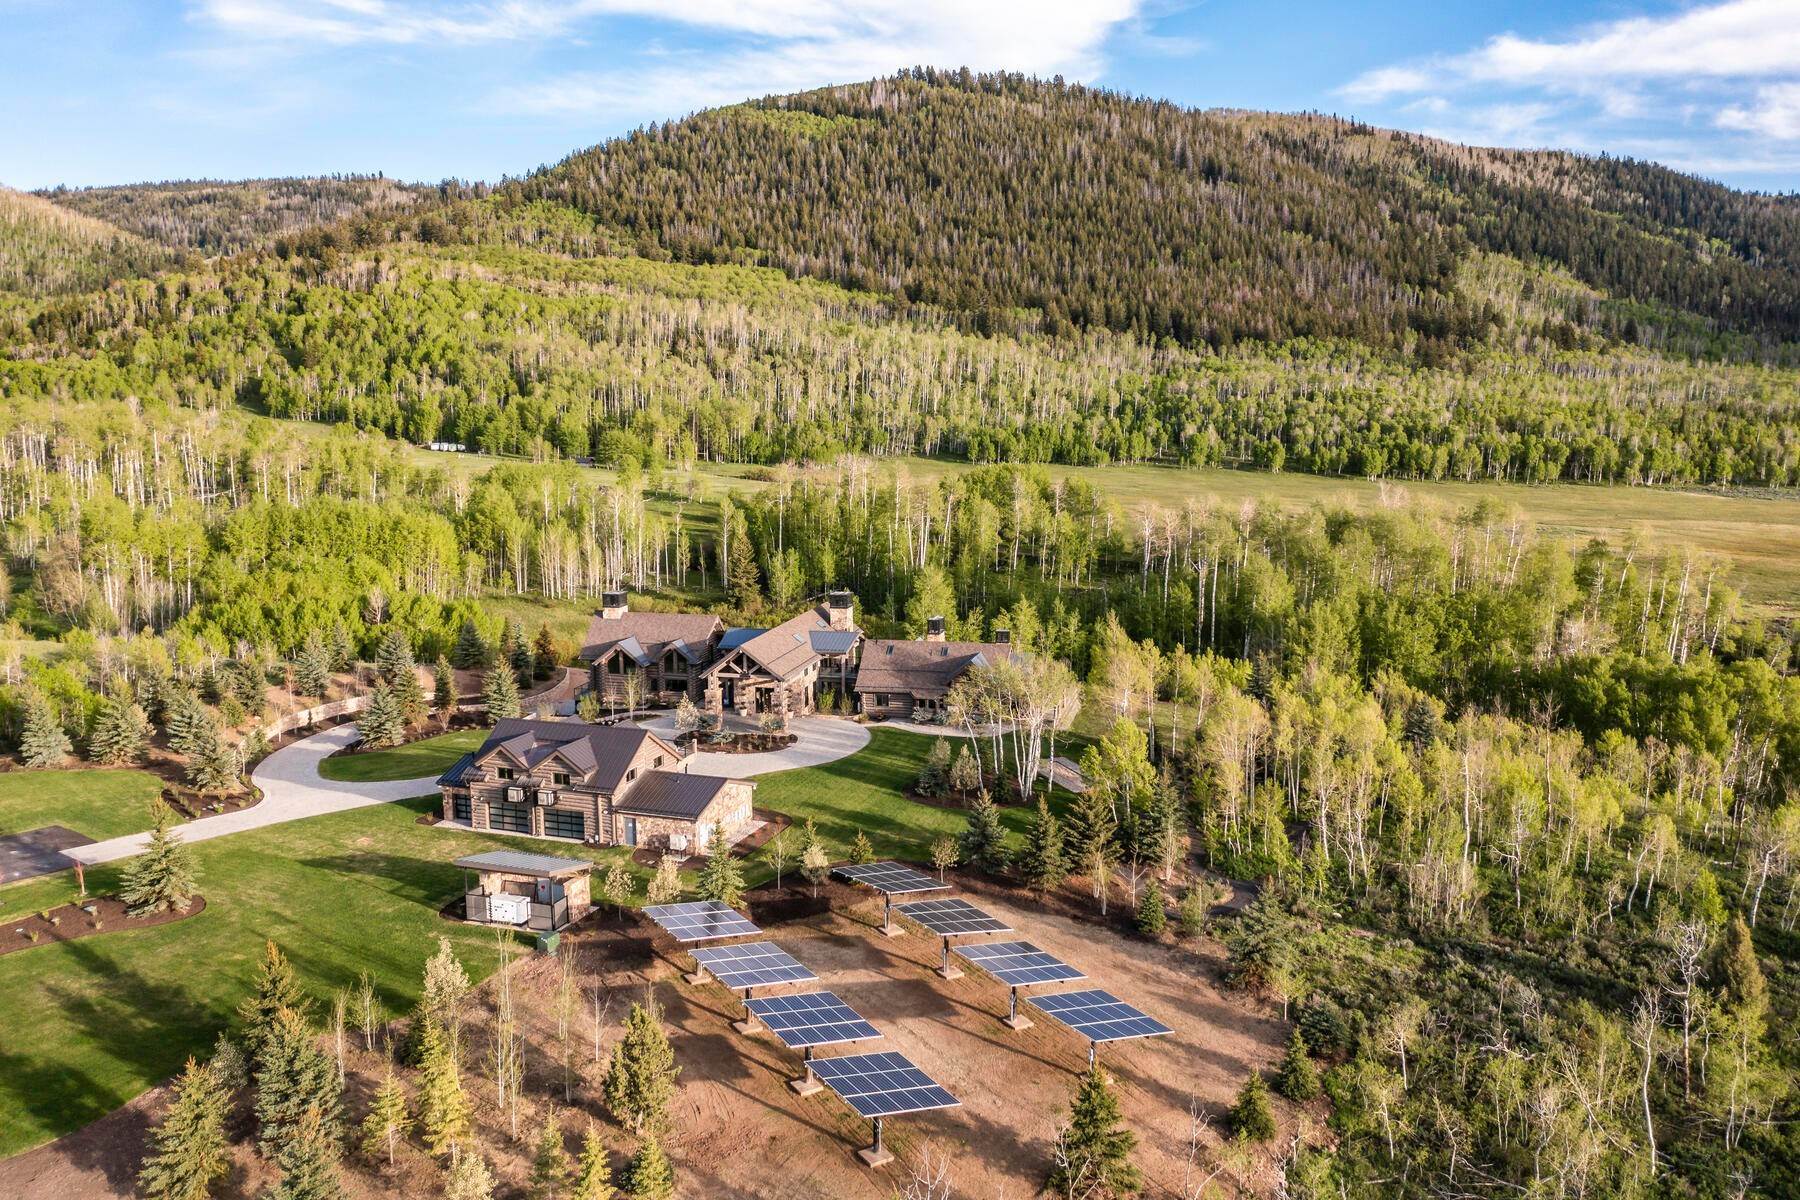 2. Single Family Homes for Sale at 50 Acres Off The Grid In This Modern Mountain Estate 7600 E Deer Knoll Dr Woodland, Utah 84036 United States